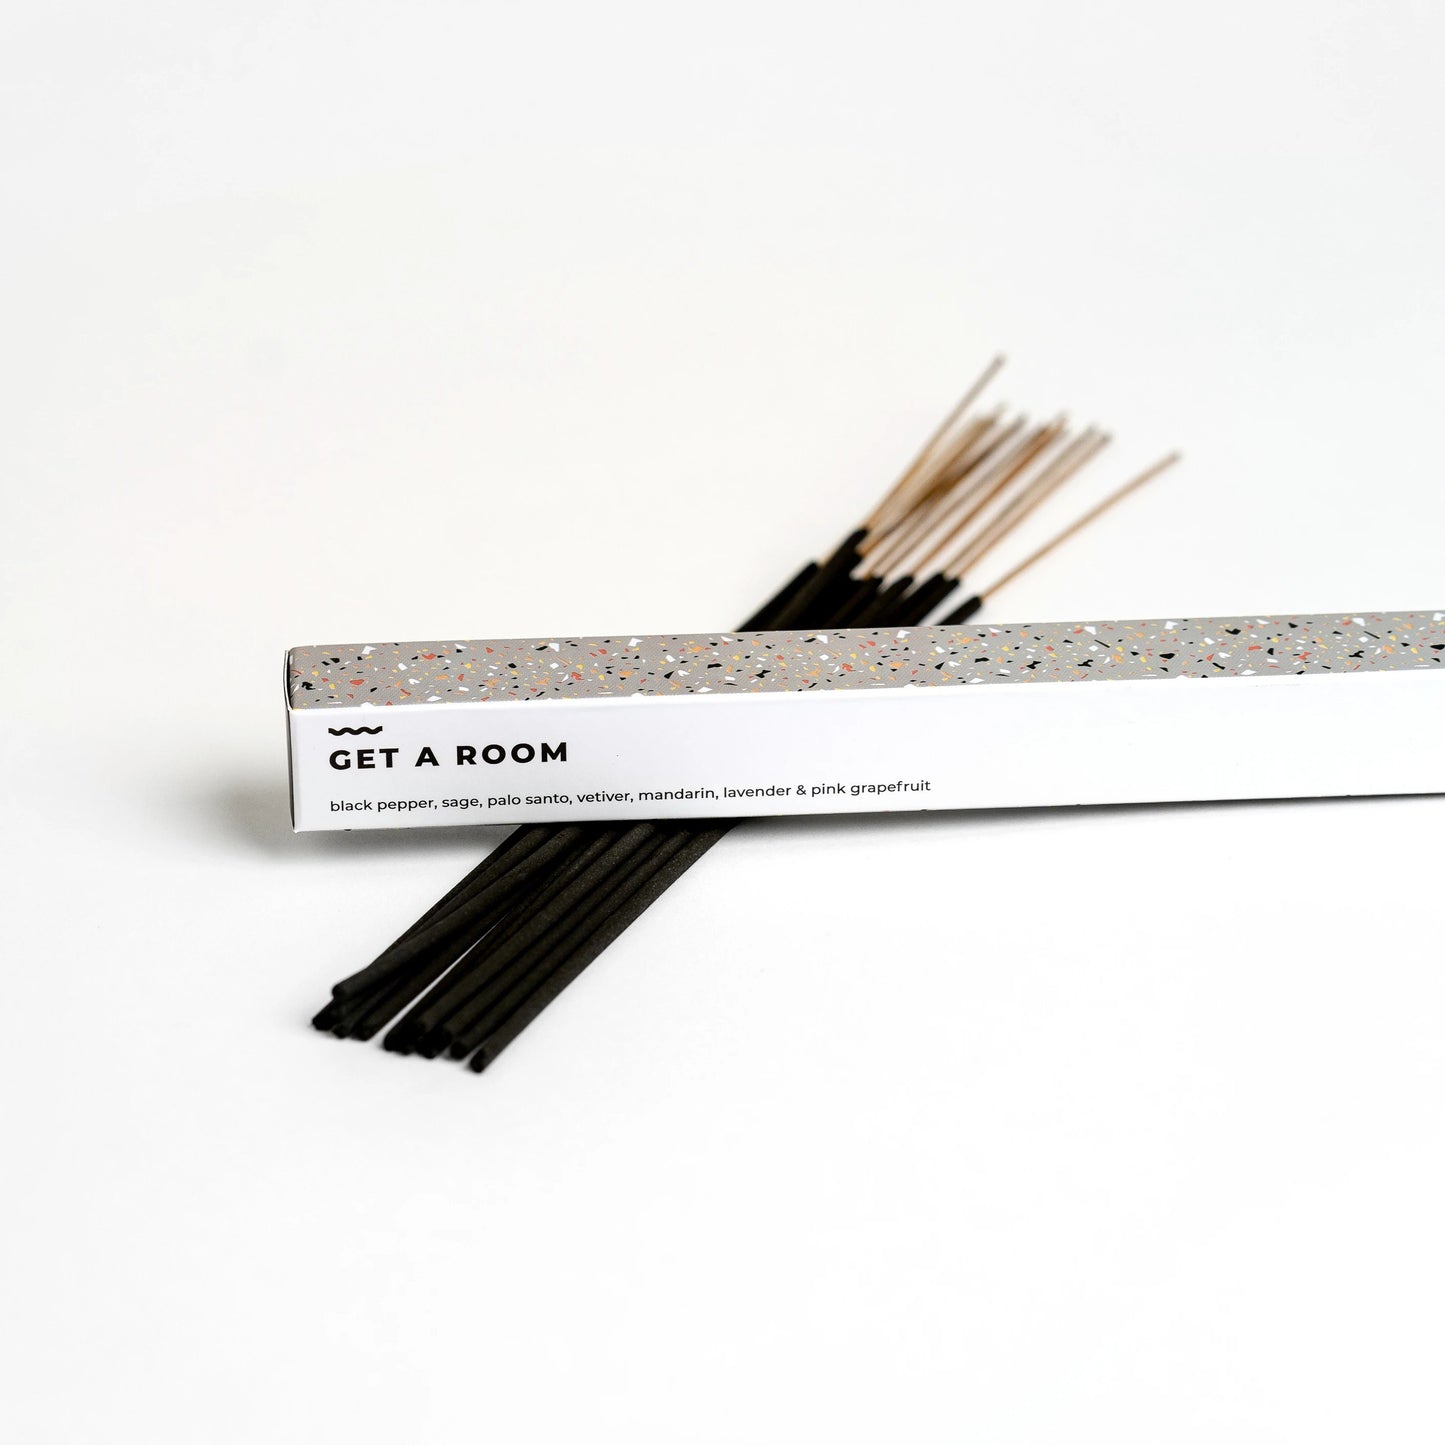 Charcoal incense sticks scented with therapeutic-grade essential oils.   Notes of: Black Pepper, Sage, Palo Santo, Vetiver, Mandarin, Lavender & Pink Grapefruit